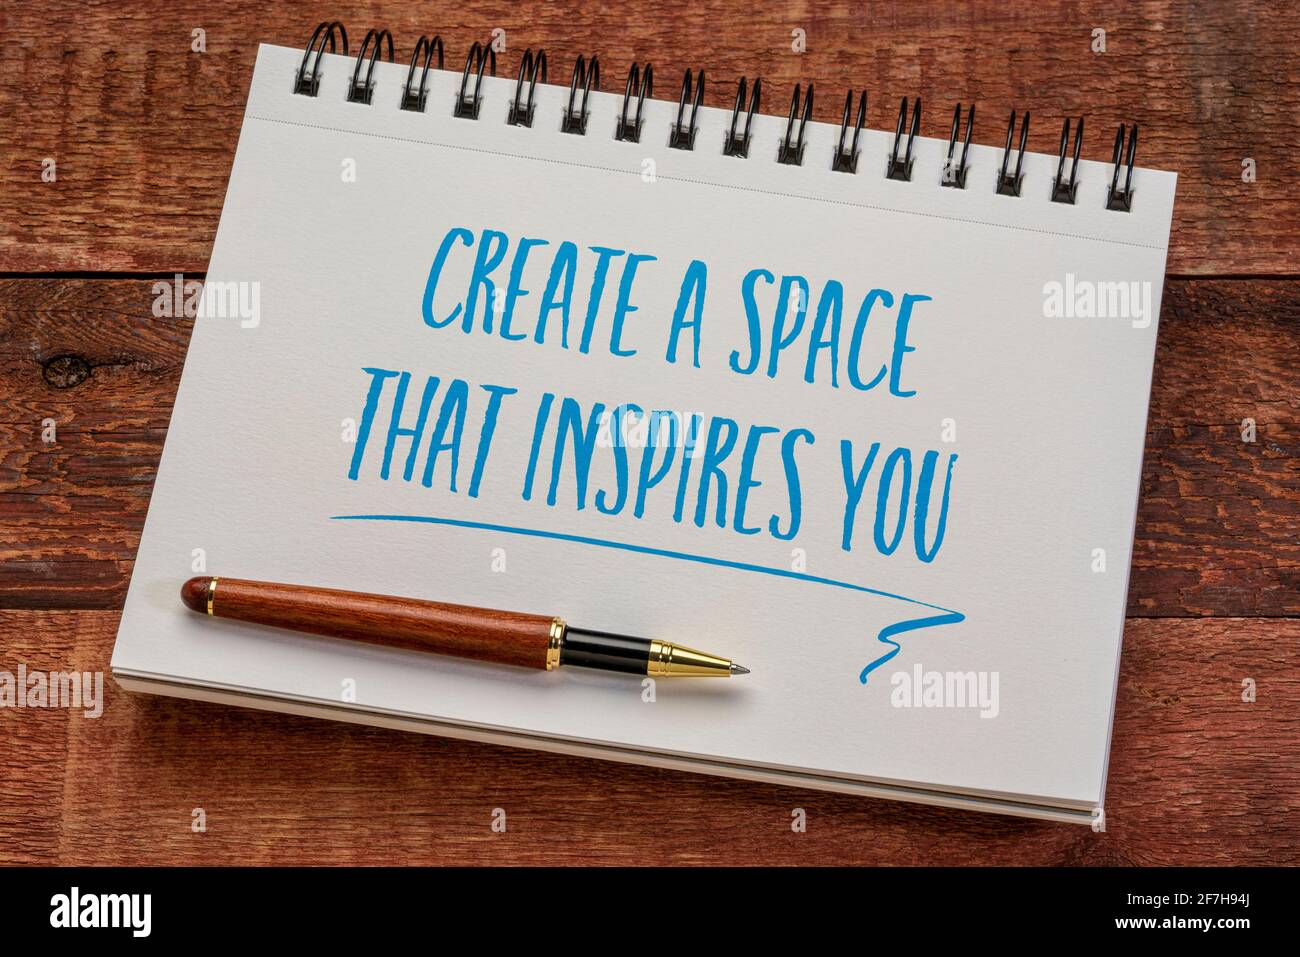 create a space that inspires you - inspirational writing in a spiral notebook with a stylish pen against weathered barn wood table, business and worki Stock Photo